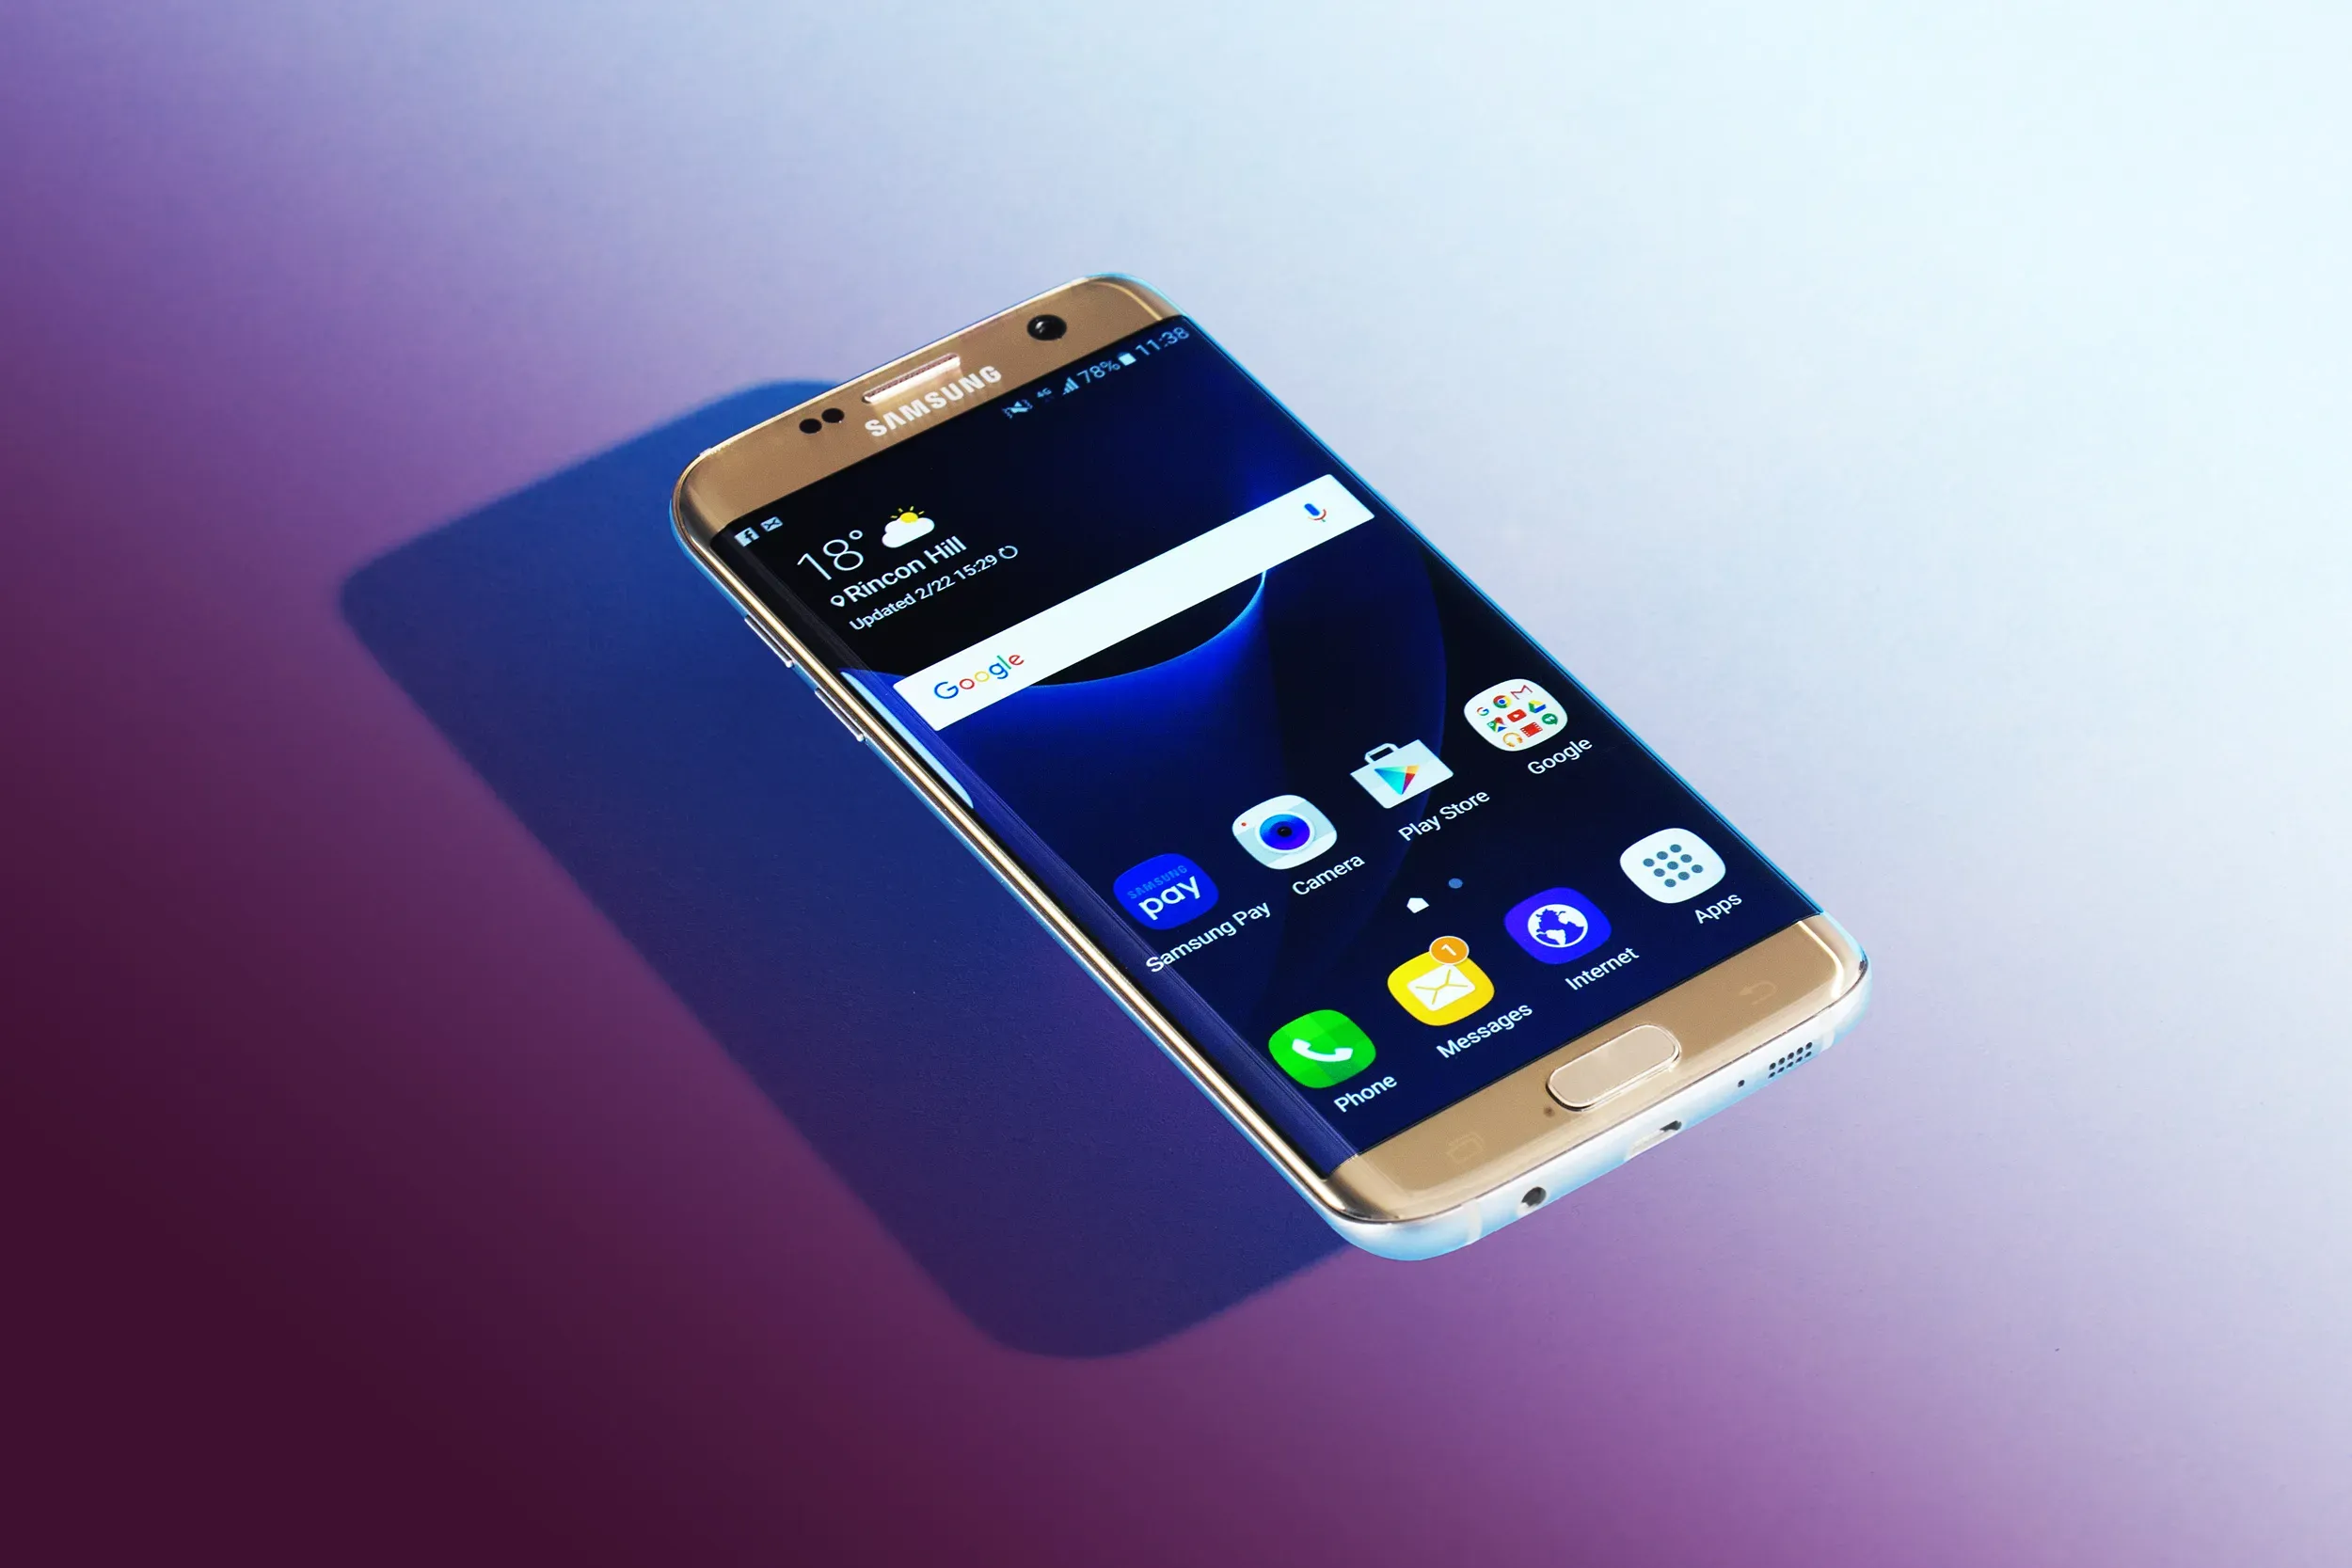 [Troubleshooting Guide] What to do if your Samsung Galaxy S7 edge continues rebooting on its own after the rooting method